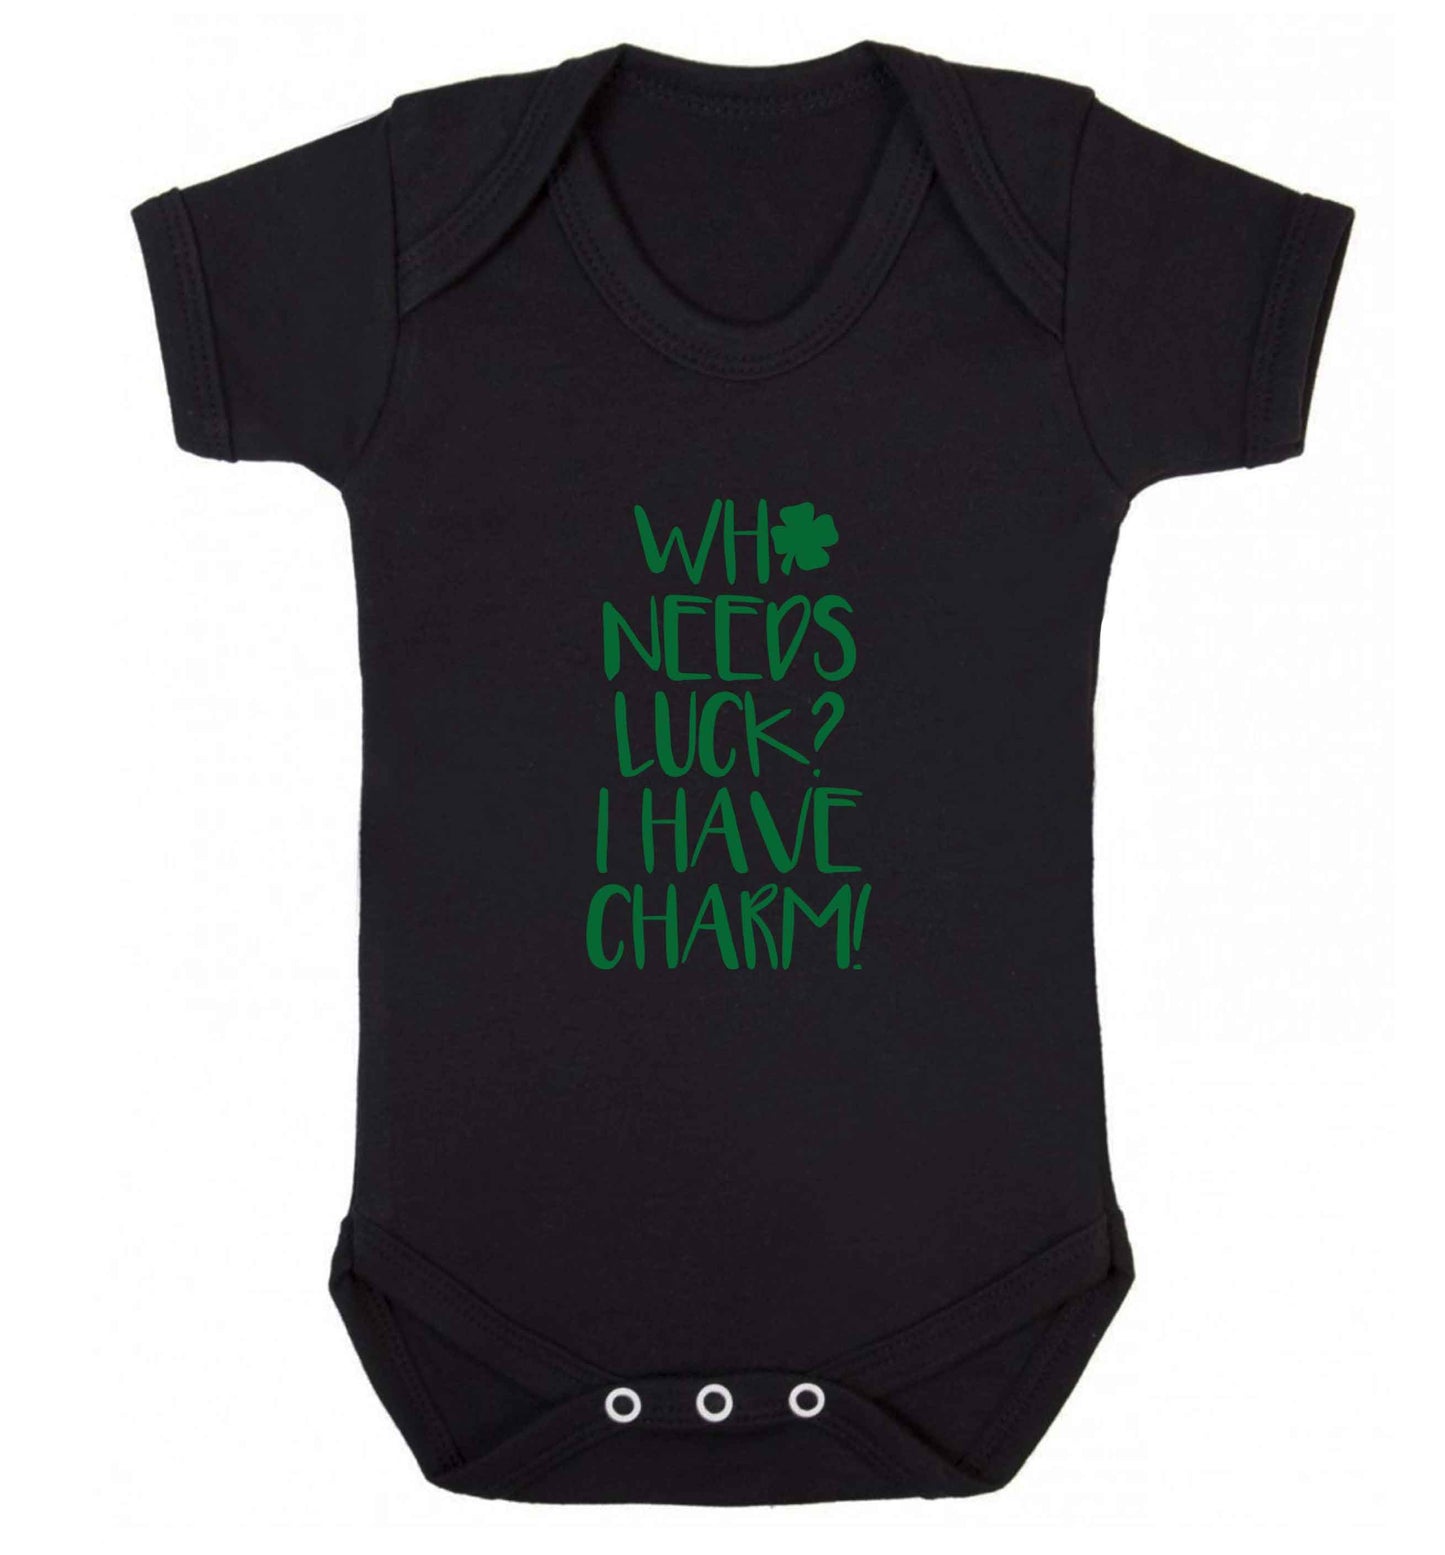 Who needs luck? I have charm! baby vest black 18-24 months